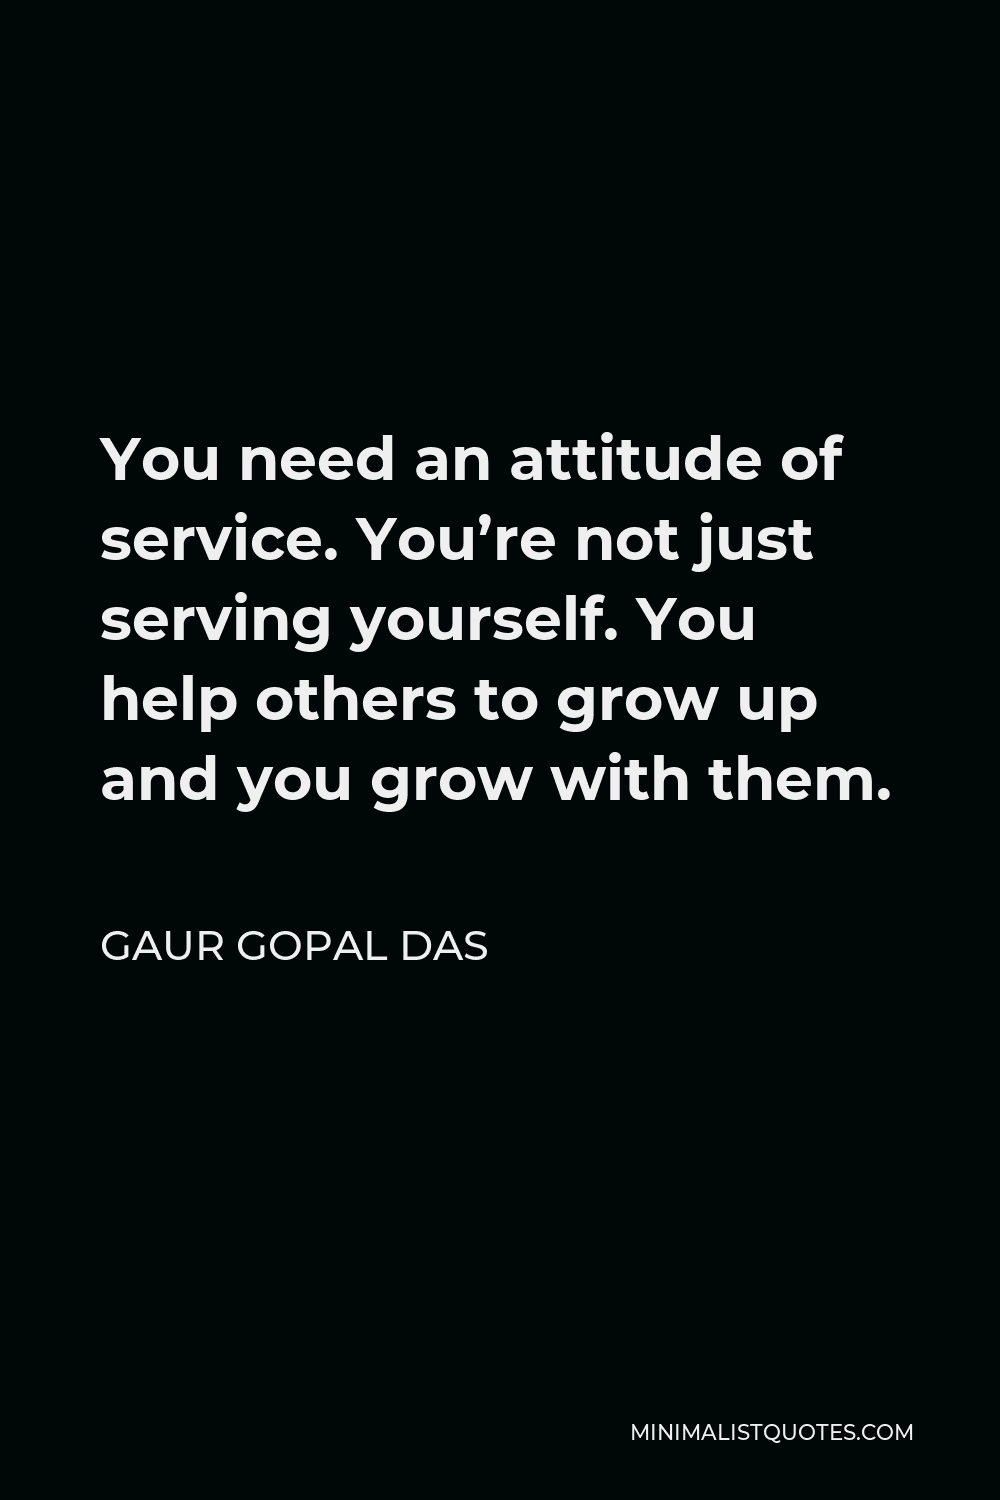 Gaur Gopal Das Quote - You need an attitude of service. You’re not just serving yourself. You help others to grow up and you grow with them.